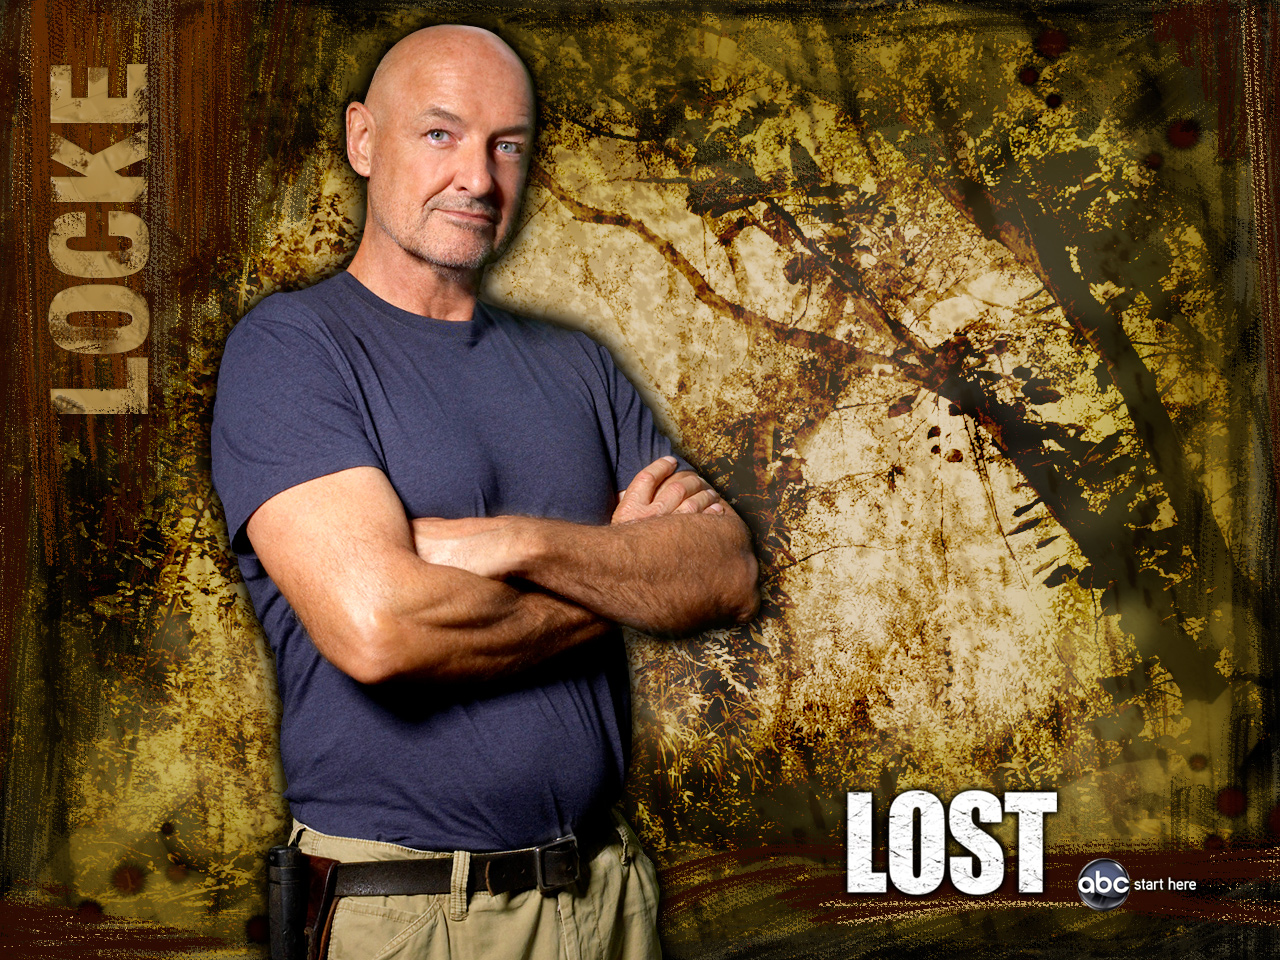 lost (tv show), tv show, lost